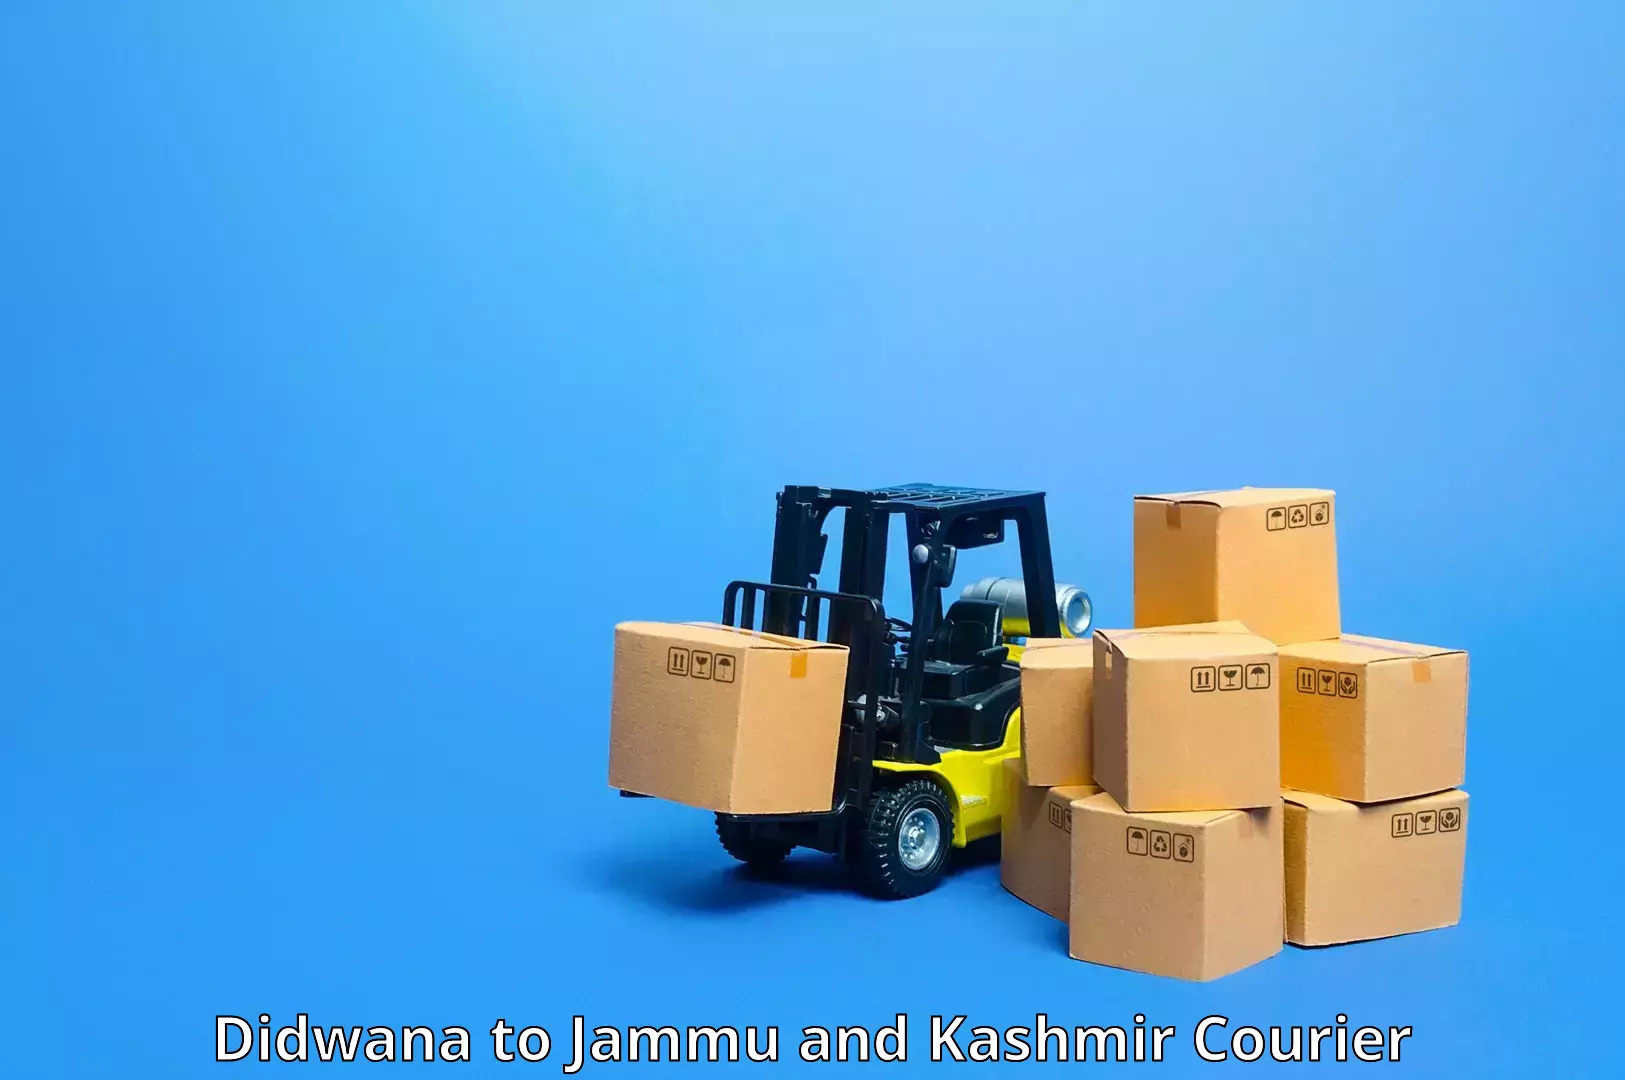 Flexible delivery schedules in Didwana to Sopore